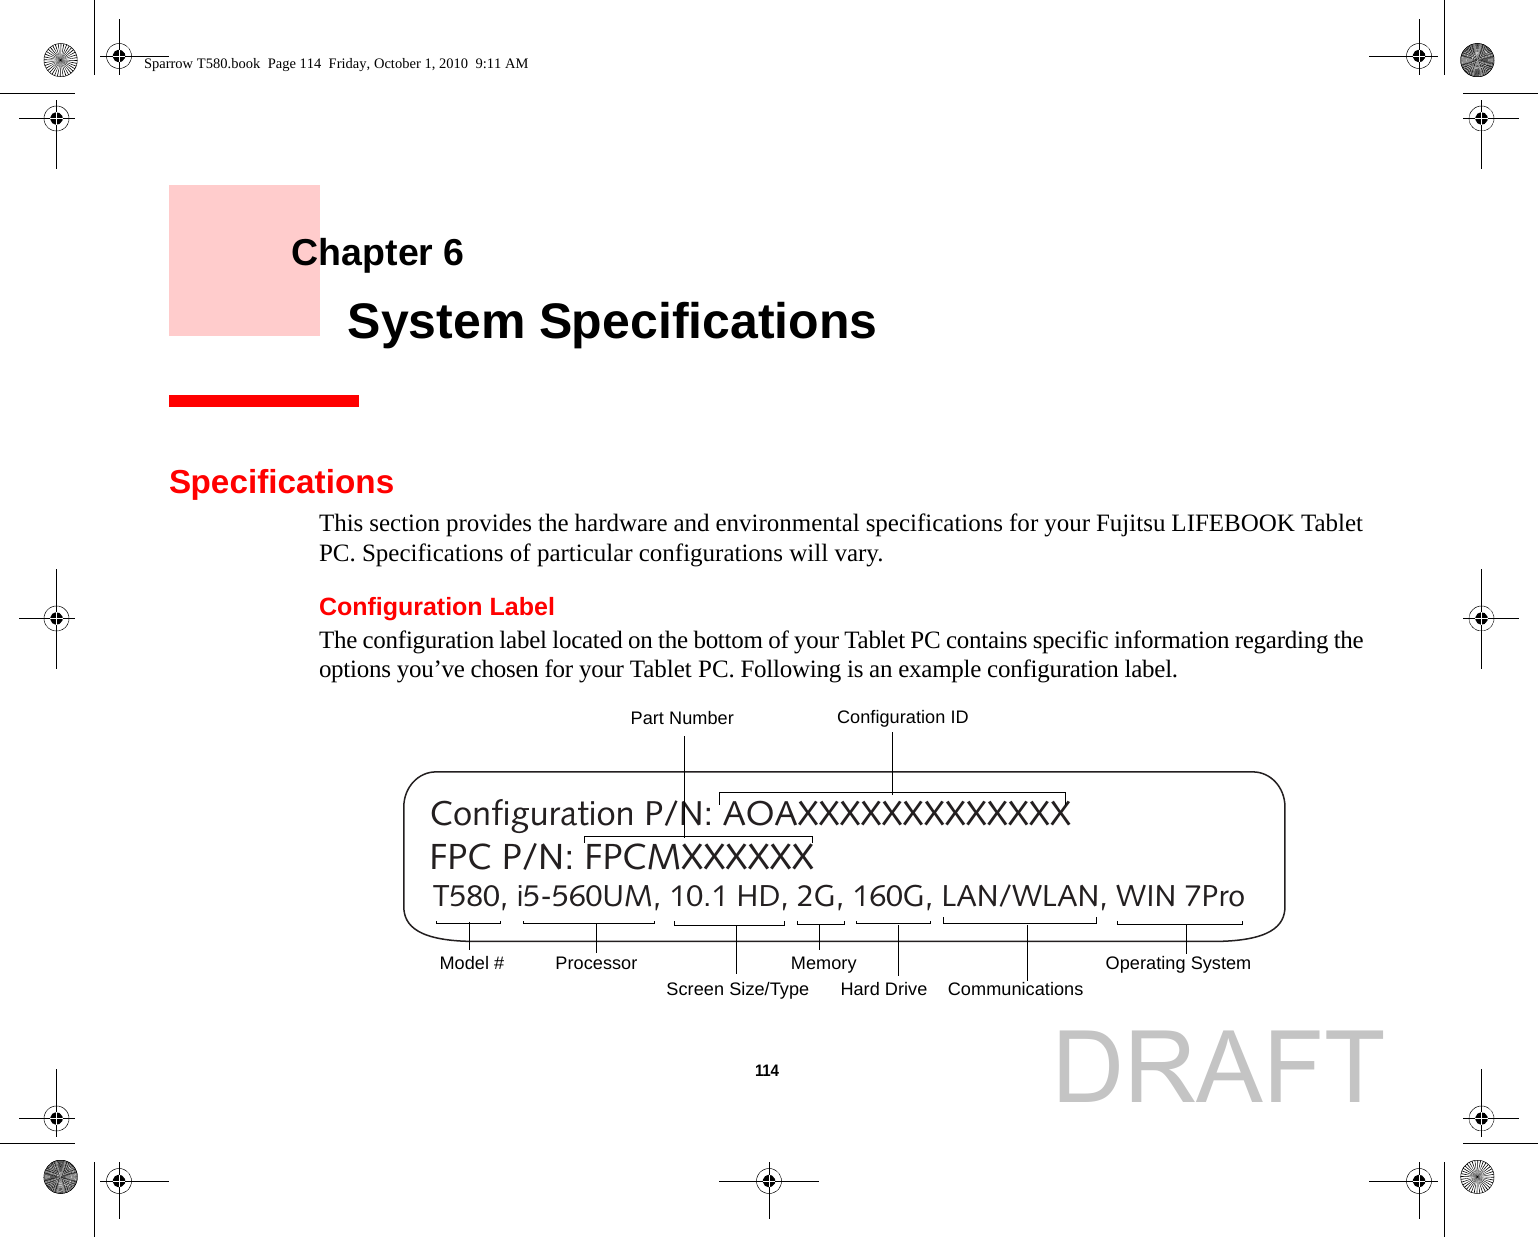 114     Chapter 6    System SpecificationsSpecificationsThis section provides the hardware and environmental specifications for your Fujitsu LIFEBOOK Tablet PC. Specifications of particular configurations will vary.Configuration LabelThe configuration label located on the bottom of your Tablet PC contains specific information regarding the options you’ve chosen for your Tablet PC. Following is an example configuration label.T580, i5-560UM, 10.1 HD, 2G, 160G, LAN/WLAN, WIN 7ProConfiguration P/N: AOAXXXXXXXXXXXXXFPC P/N: FPCMXXXXXXHard Drive Part NumberProcessorModel # Memory Operating System Screen Size/TypeConfiguration IDCommunicationsSparrow T580.book  Page 114  Friday, October 1, 2010  9:11 AMDRAFT